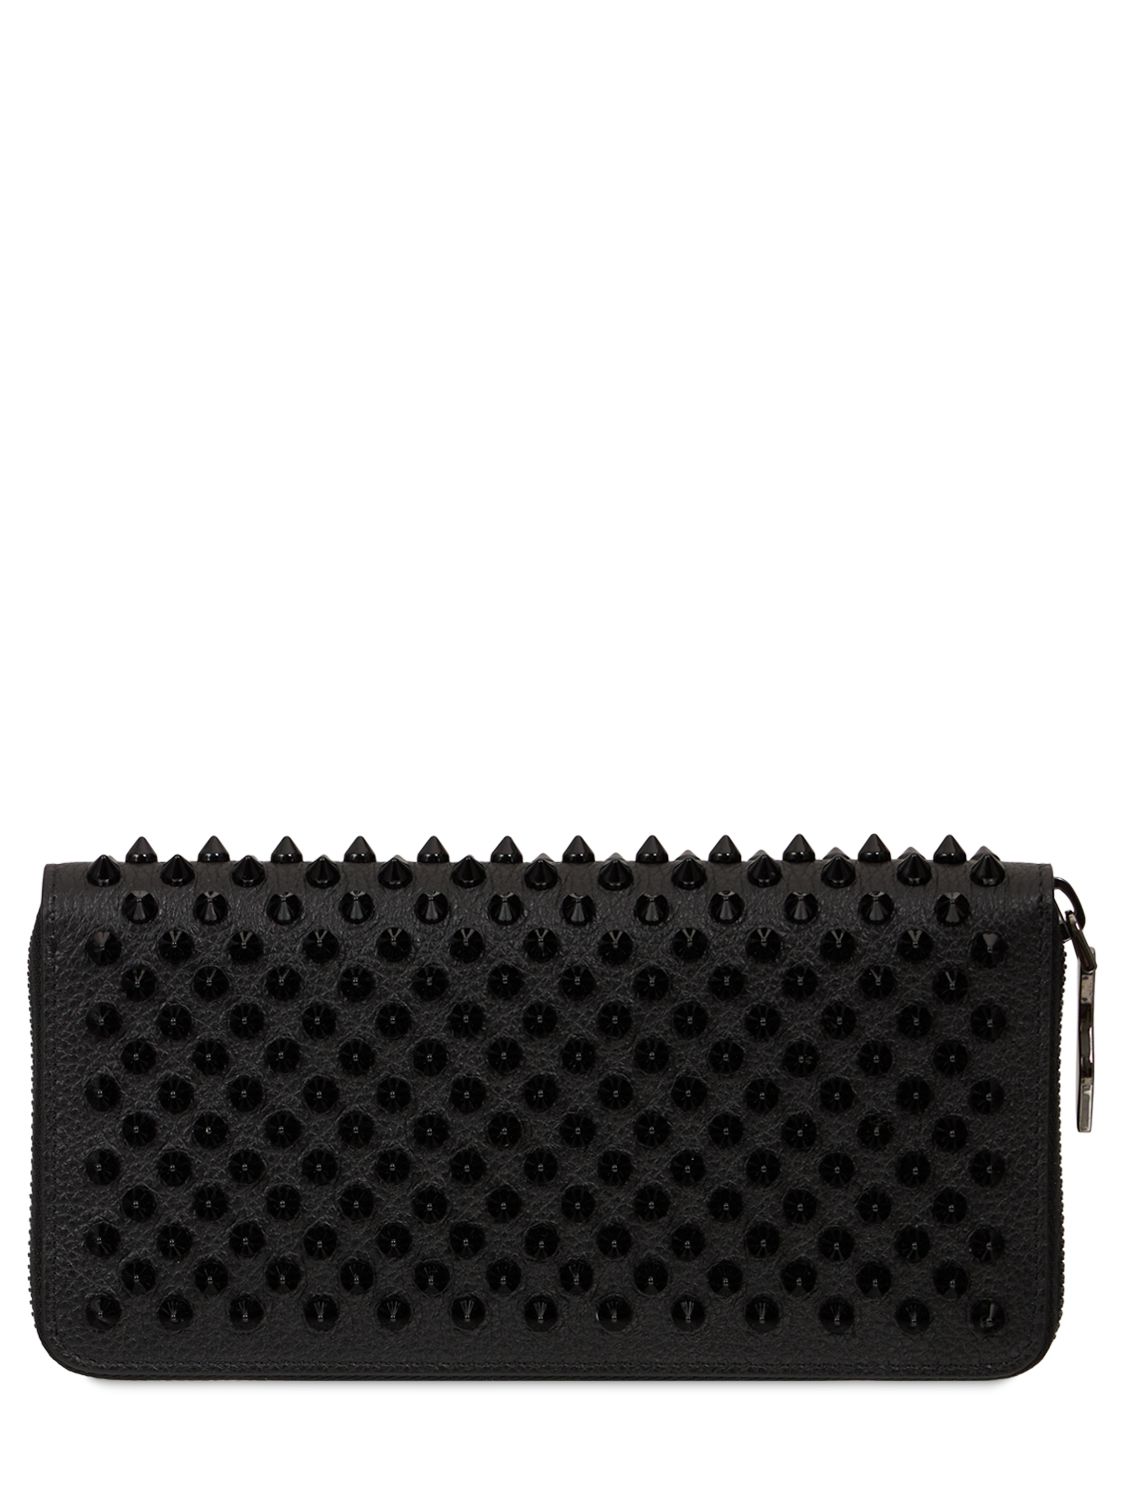 Panettone Spiked Leather Zip Wallet